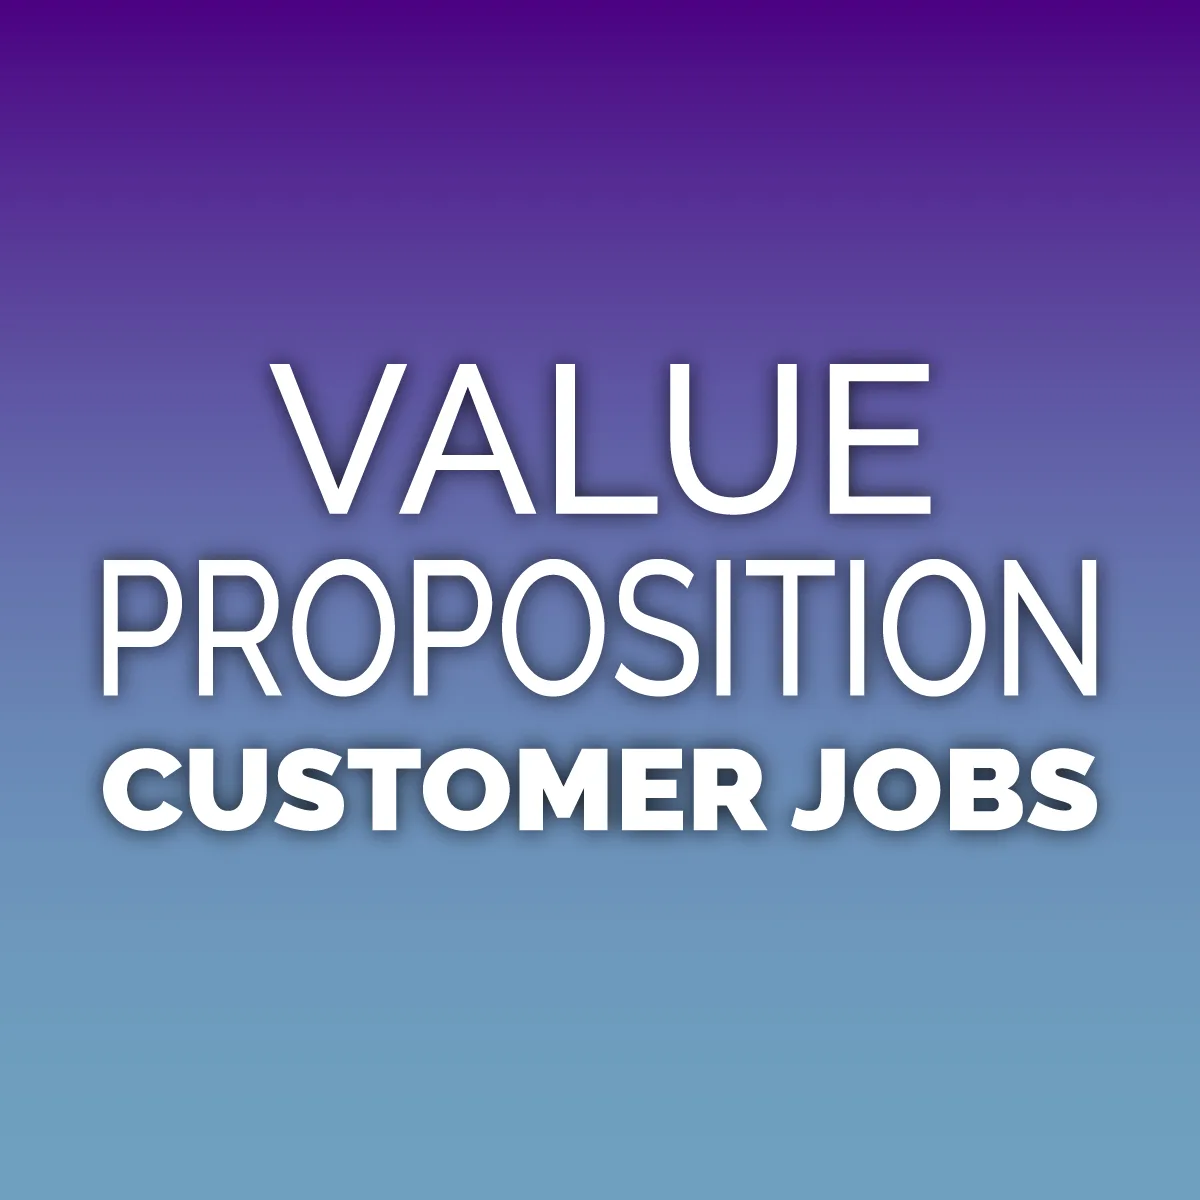 Customer jobs and their importance in the value proposition